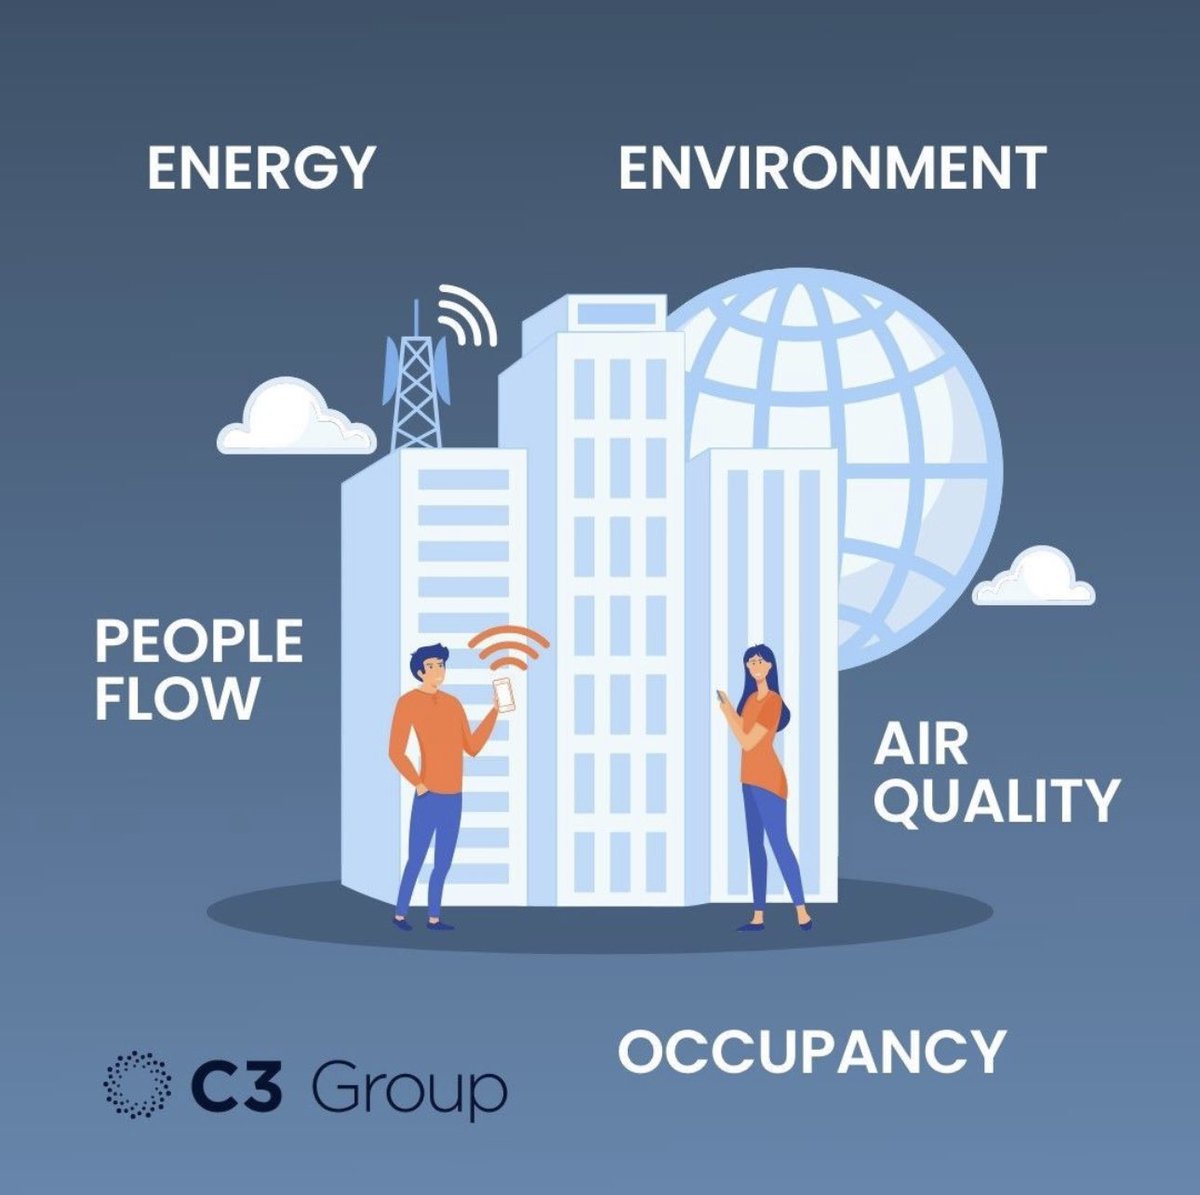 🌱🏢 Experience the C3 Group difference in transforming your building's energy efficiency! 💡🌍

#EnergyEfficiency #NetZero #CarbonEmissions #BuildingPerformance #GreenBuildings 🌳💡🏢🌐